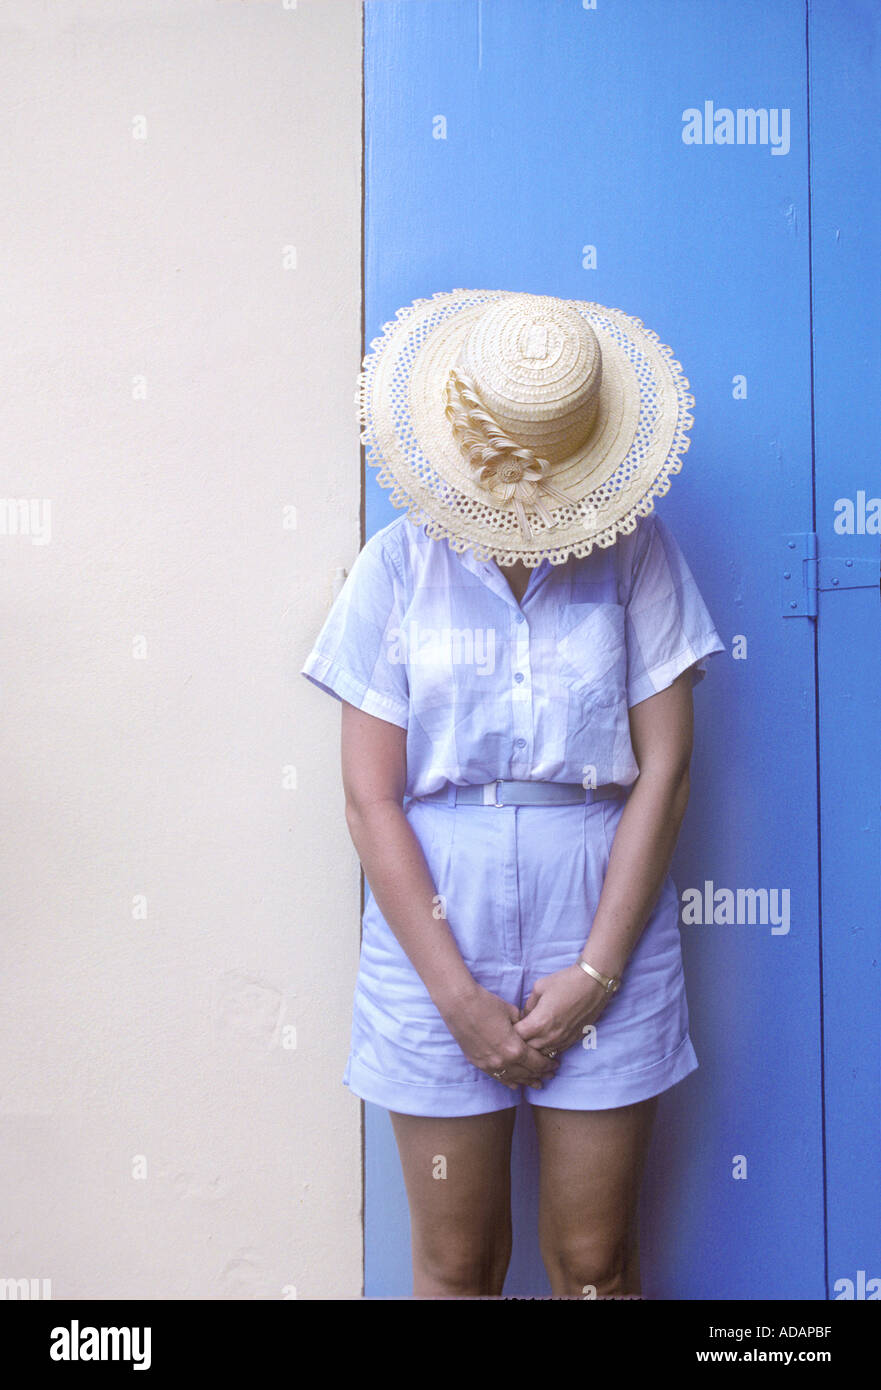 Woman With Head Down Against Blue And Tan Wall, Matching Her Outfit Stock Photo